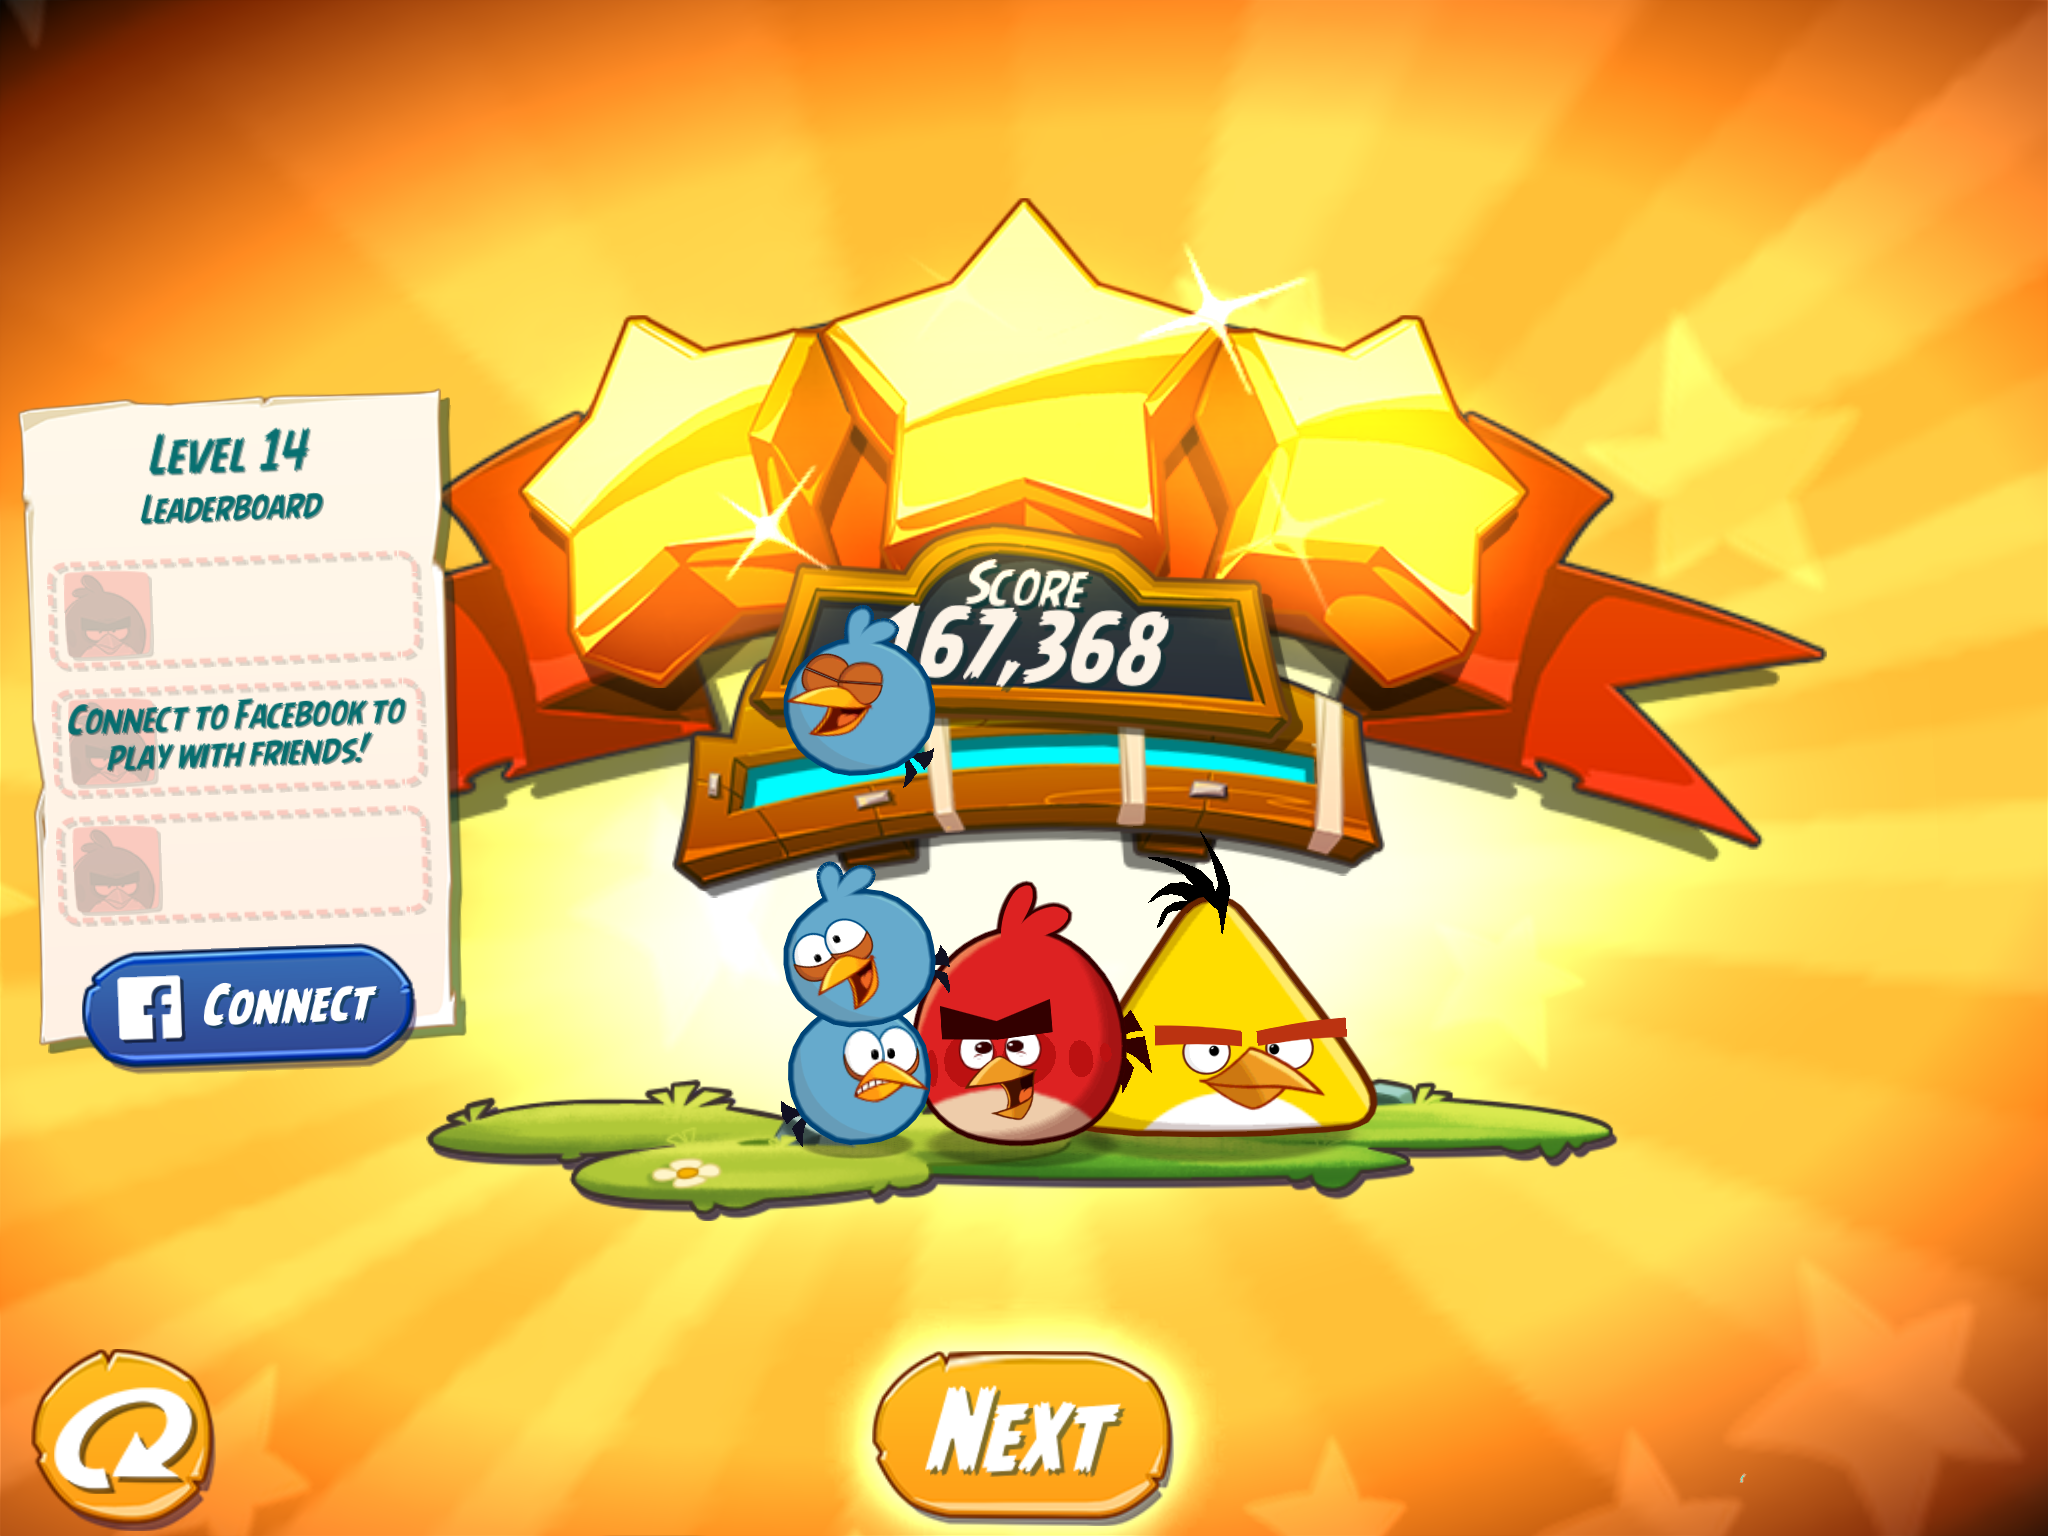 Angry Birds 2: Level 14 167,368 points